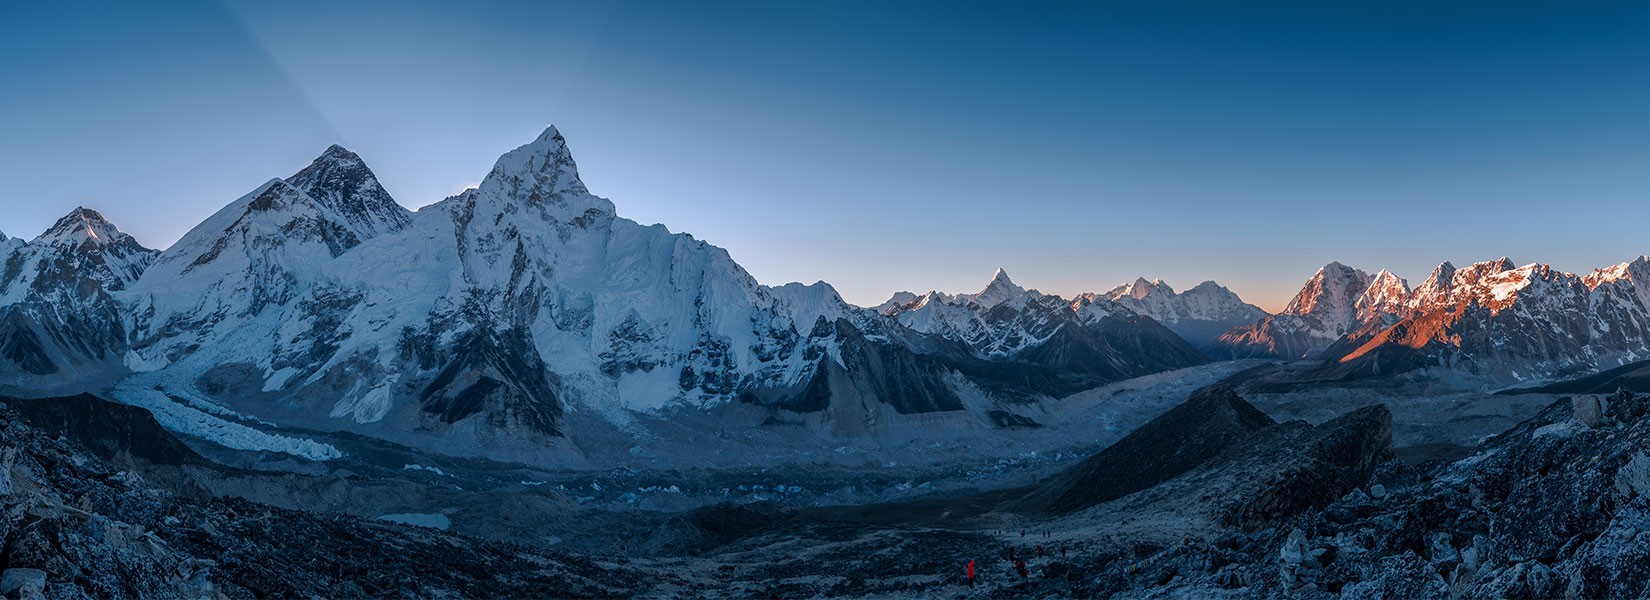 is there mobile phone reception on the everest base camp trek?